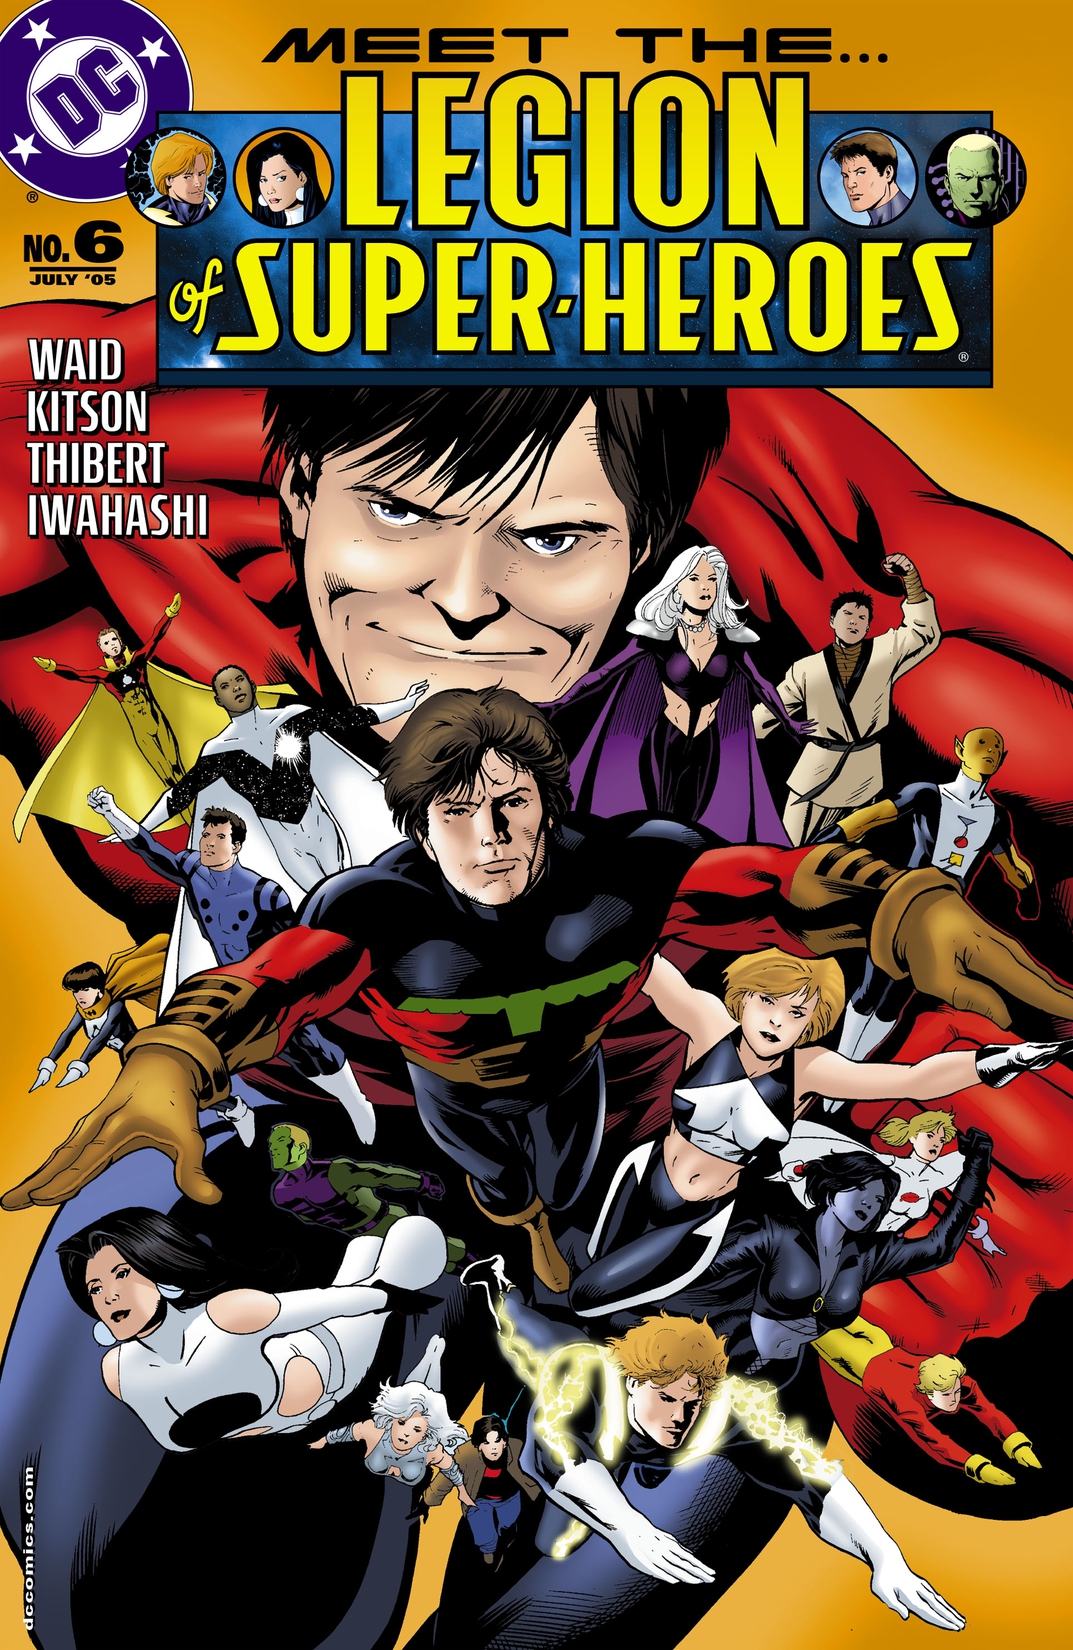 Legion of Super Heroes (2004-) #6 preview images